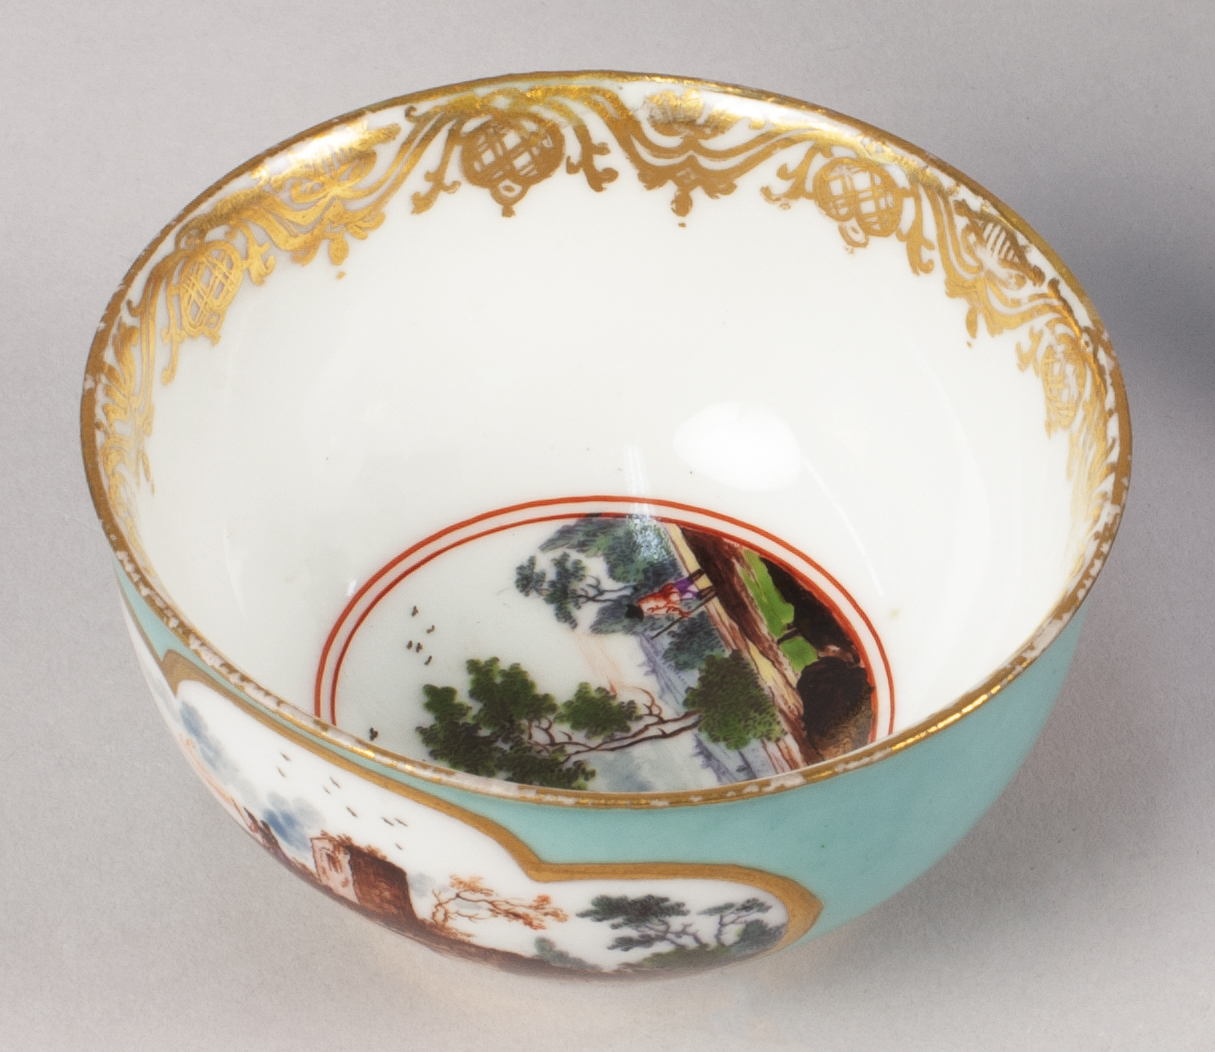 Overhead view of a teacup that is teal on the outside and white on the inside. The rim boasts a decorative gilded pattern and pastoral scenes of featured in vignettes on both the cup’s side and interior bottom.